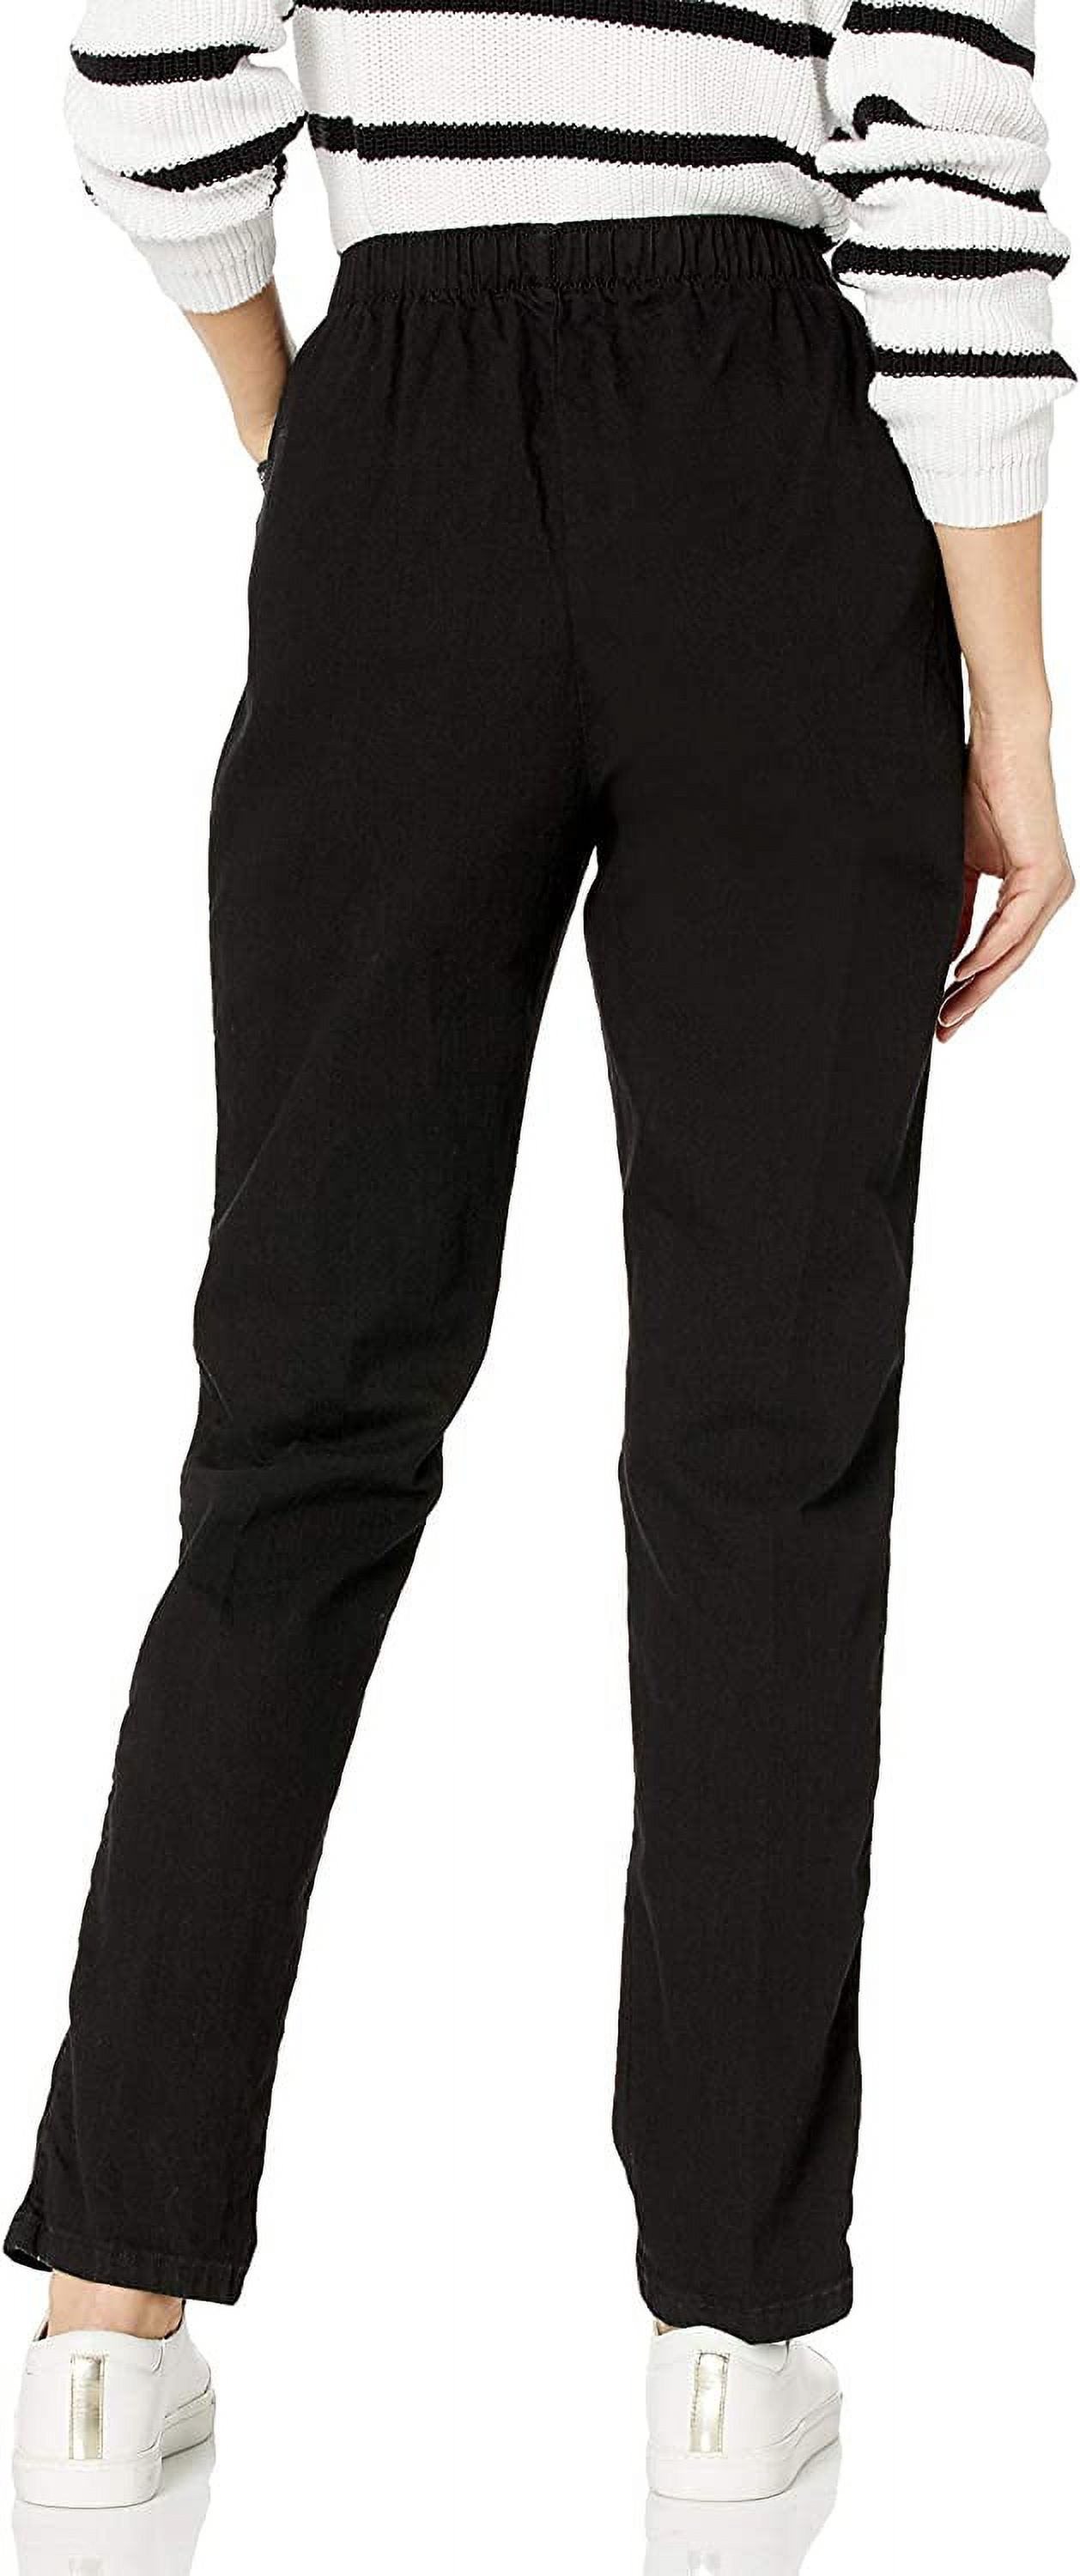 Women's Comfort Stretch Legging Available in Regular and Petite ...